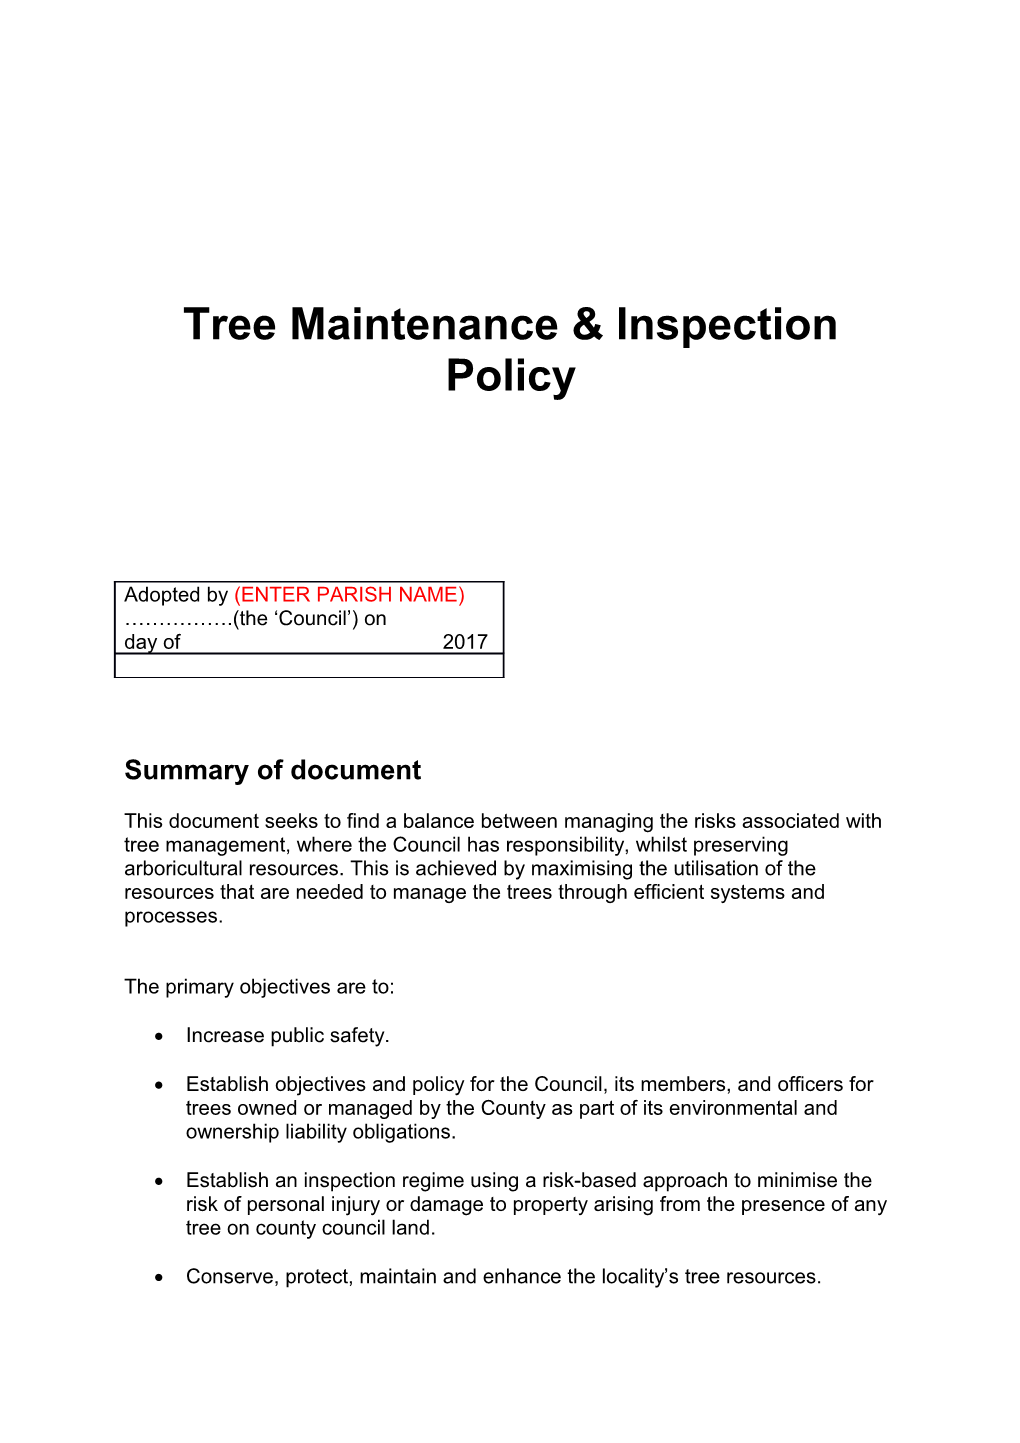 Tree Maintenance & Inspection Policy